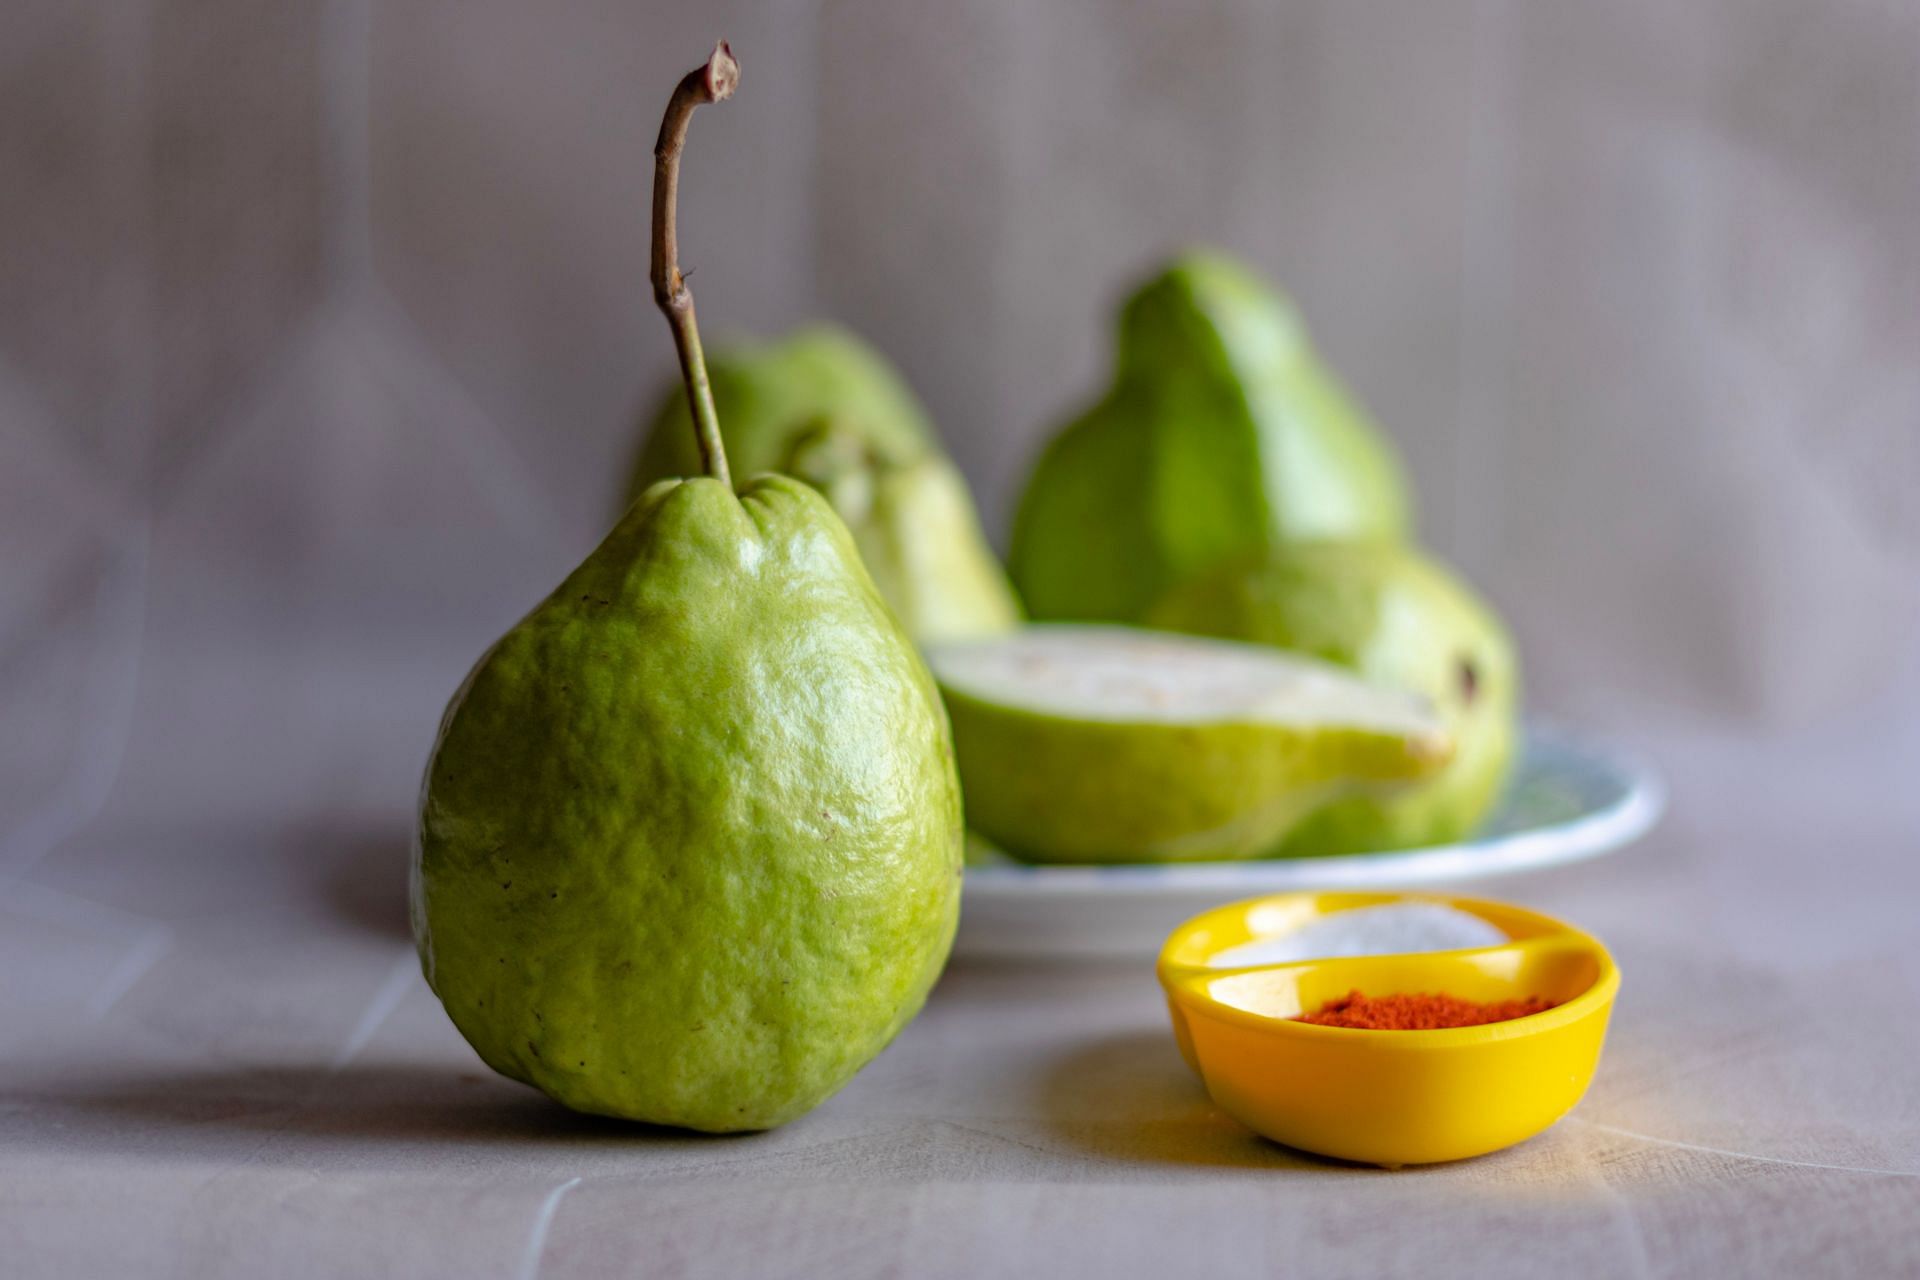 Guavas are nutritious and rich in antioxidants. (Image via Unsplash/VD Photography)